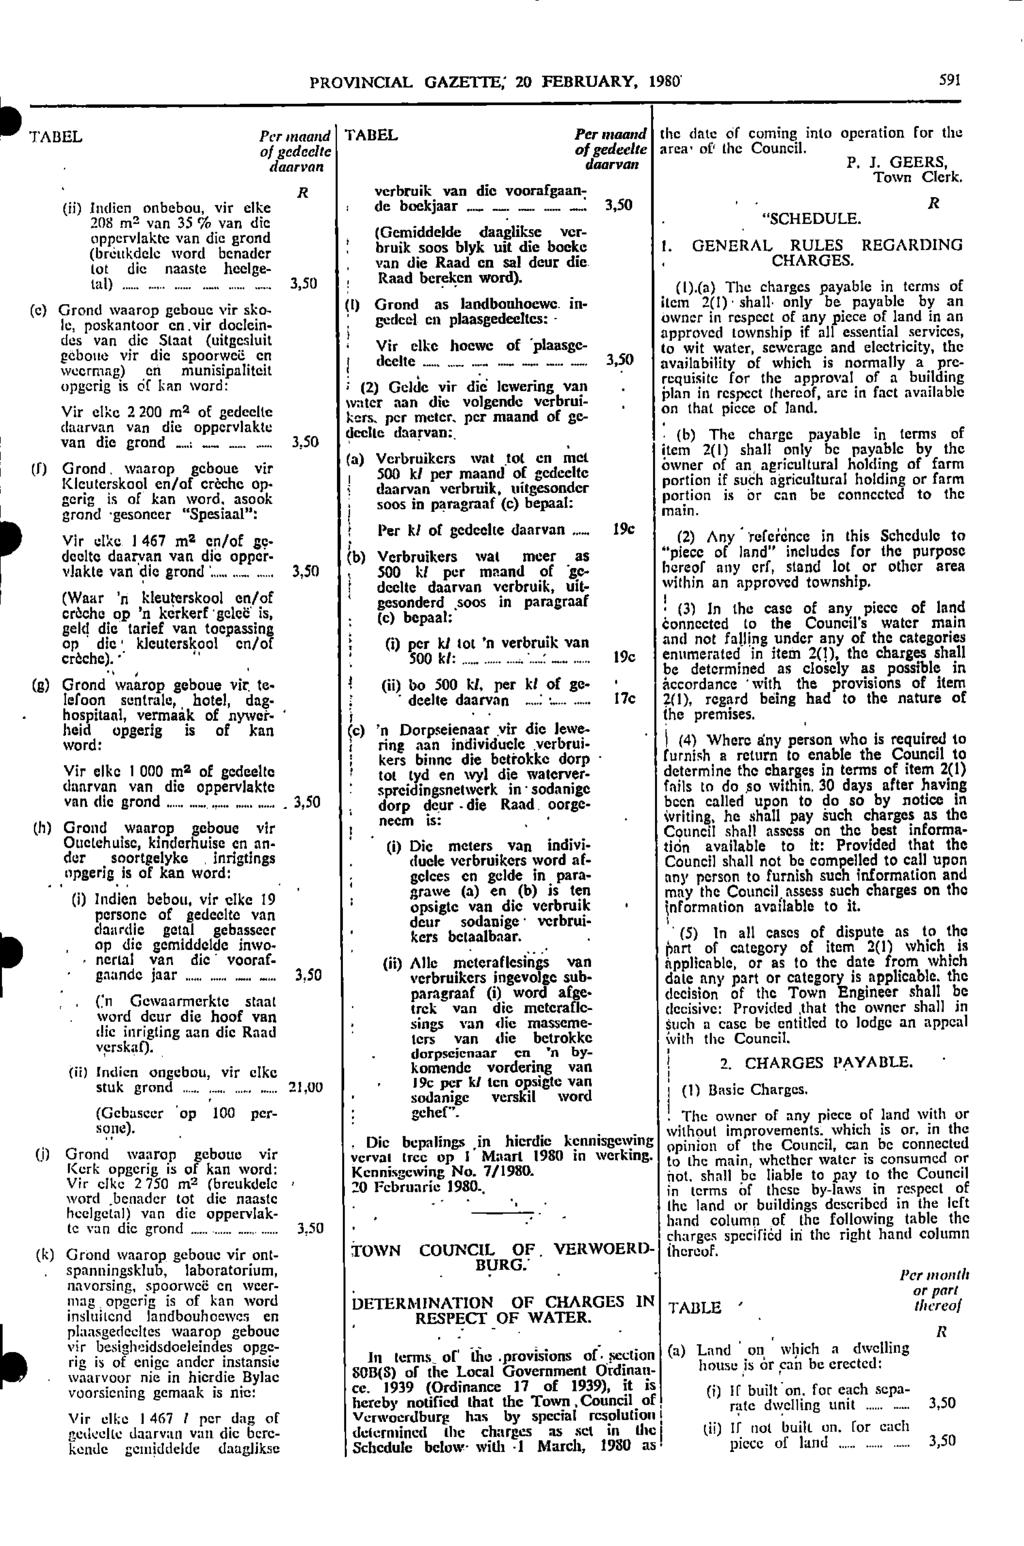 (f) Kleuterskool 500 PROVNCAL GAZETTE; 20 FEBRUARY 1930 591 itabel Per amend TABEL Per maand the date of coming into operation for the of periodic of gedeelte area of the Council daarvan daarvan P